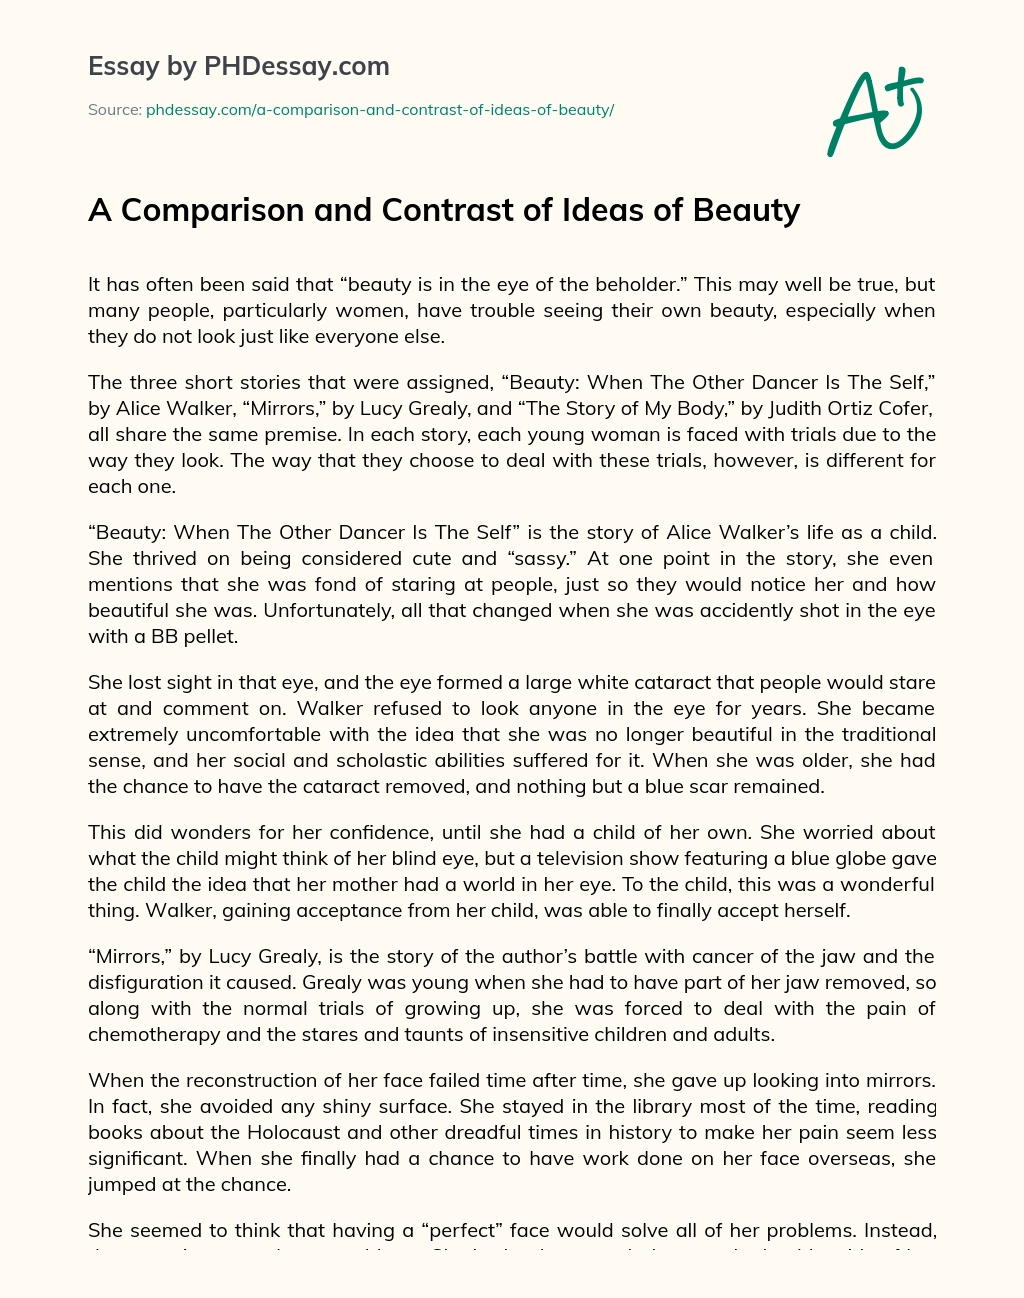 A Comparison and Contrast of Ideas of Beauty